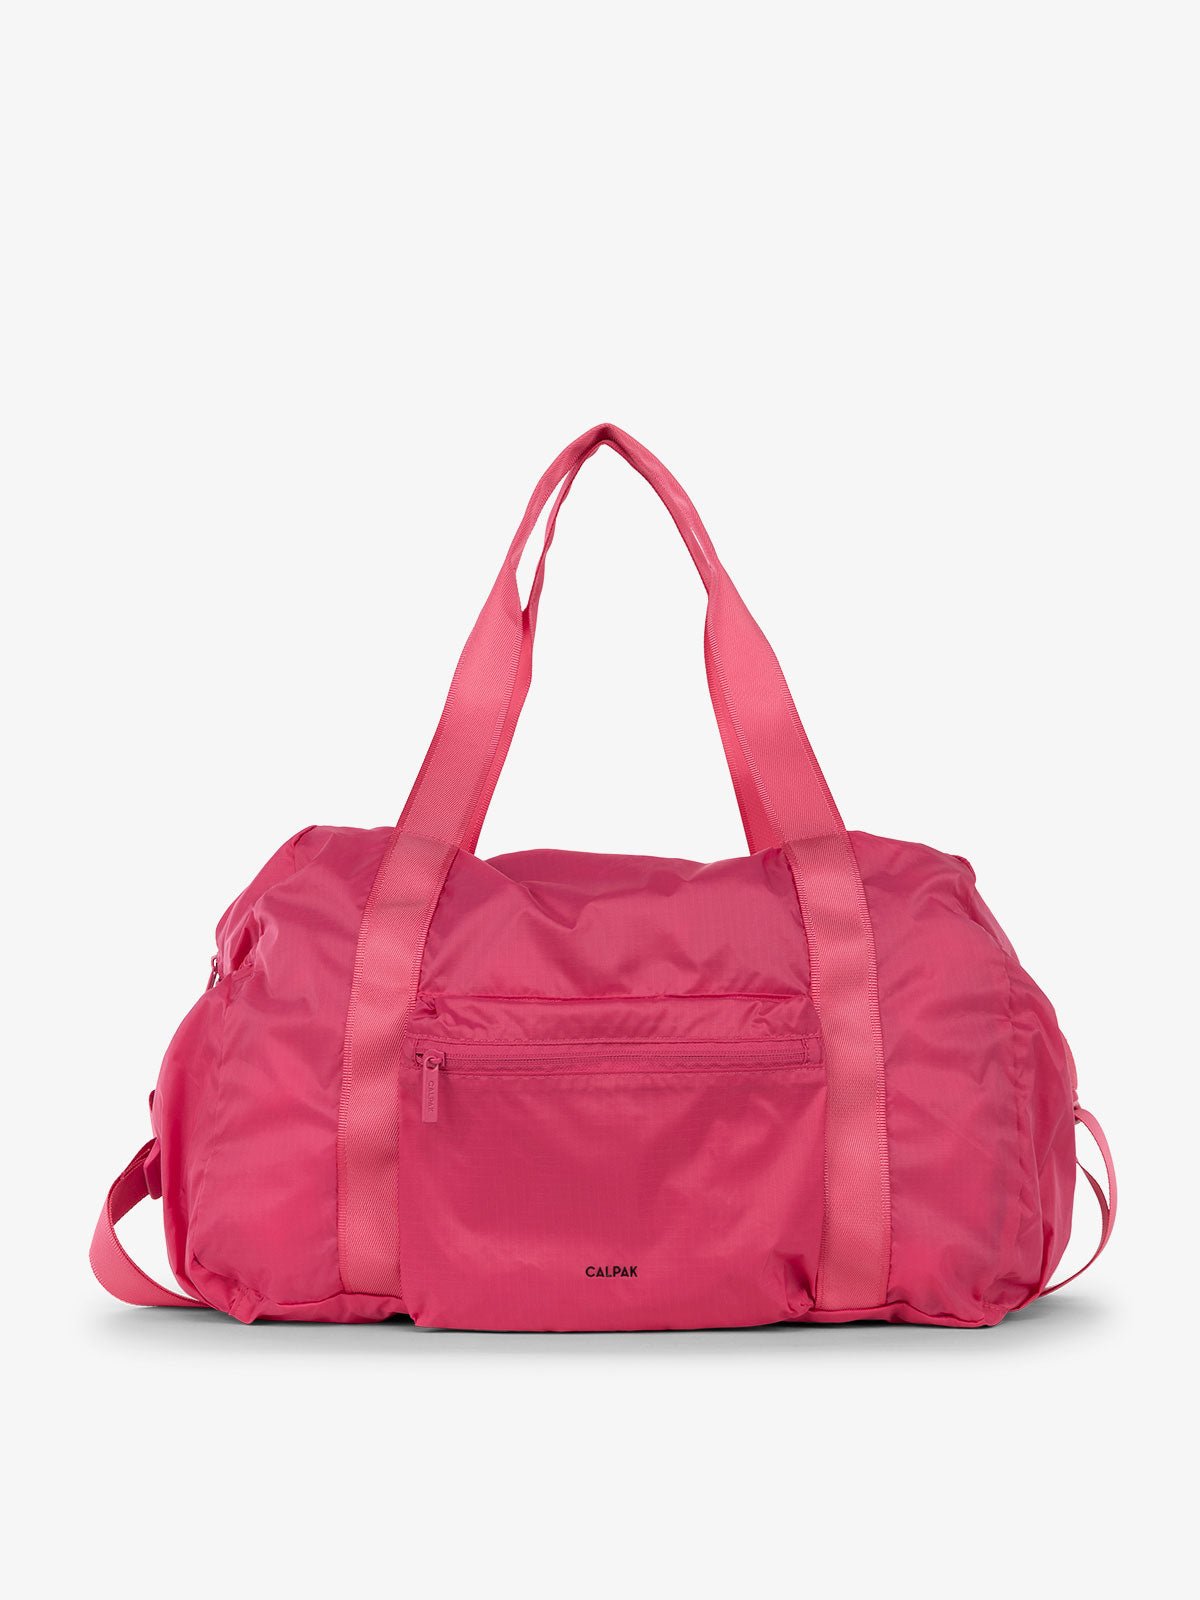 CALPAK Compakt duffel bag with removable crossbody strap and water resistant fabric in dragonfruit